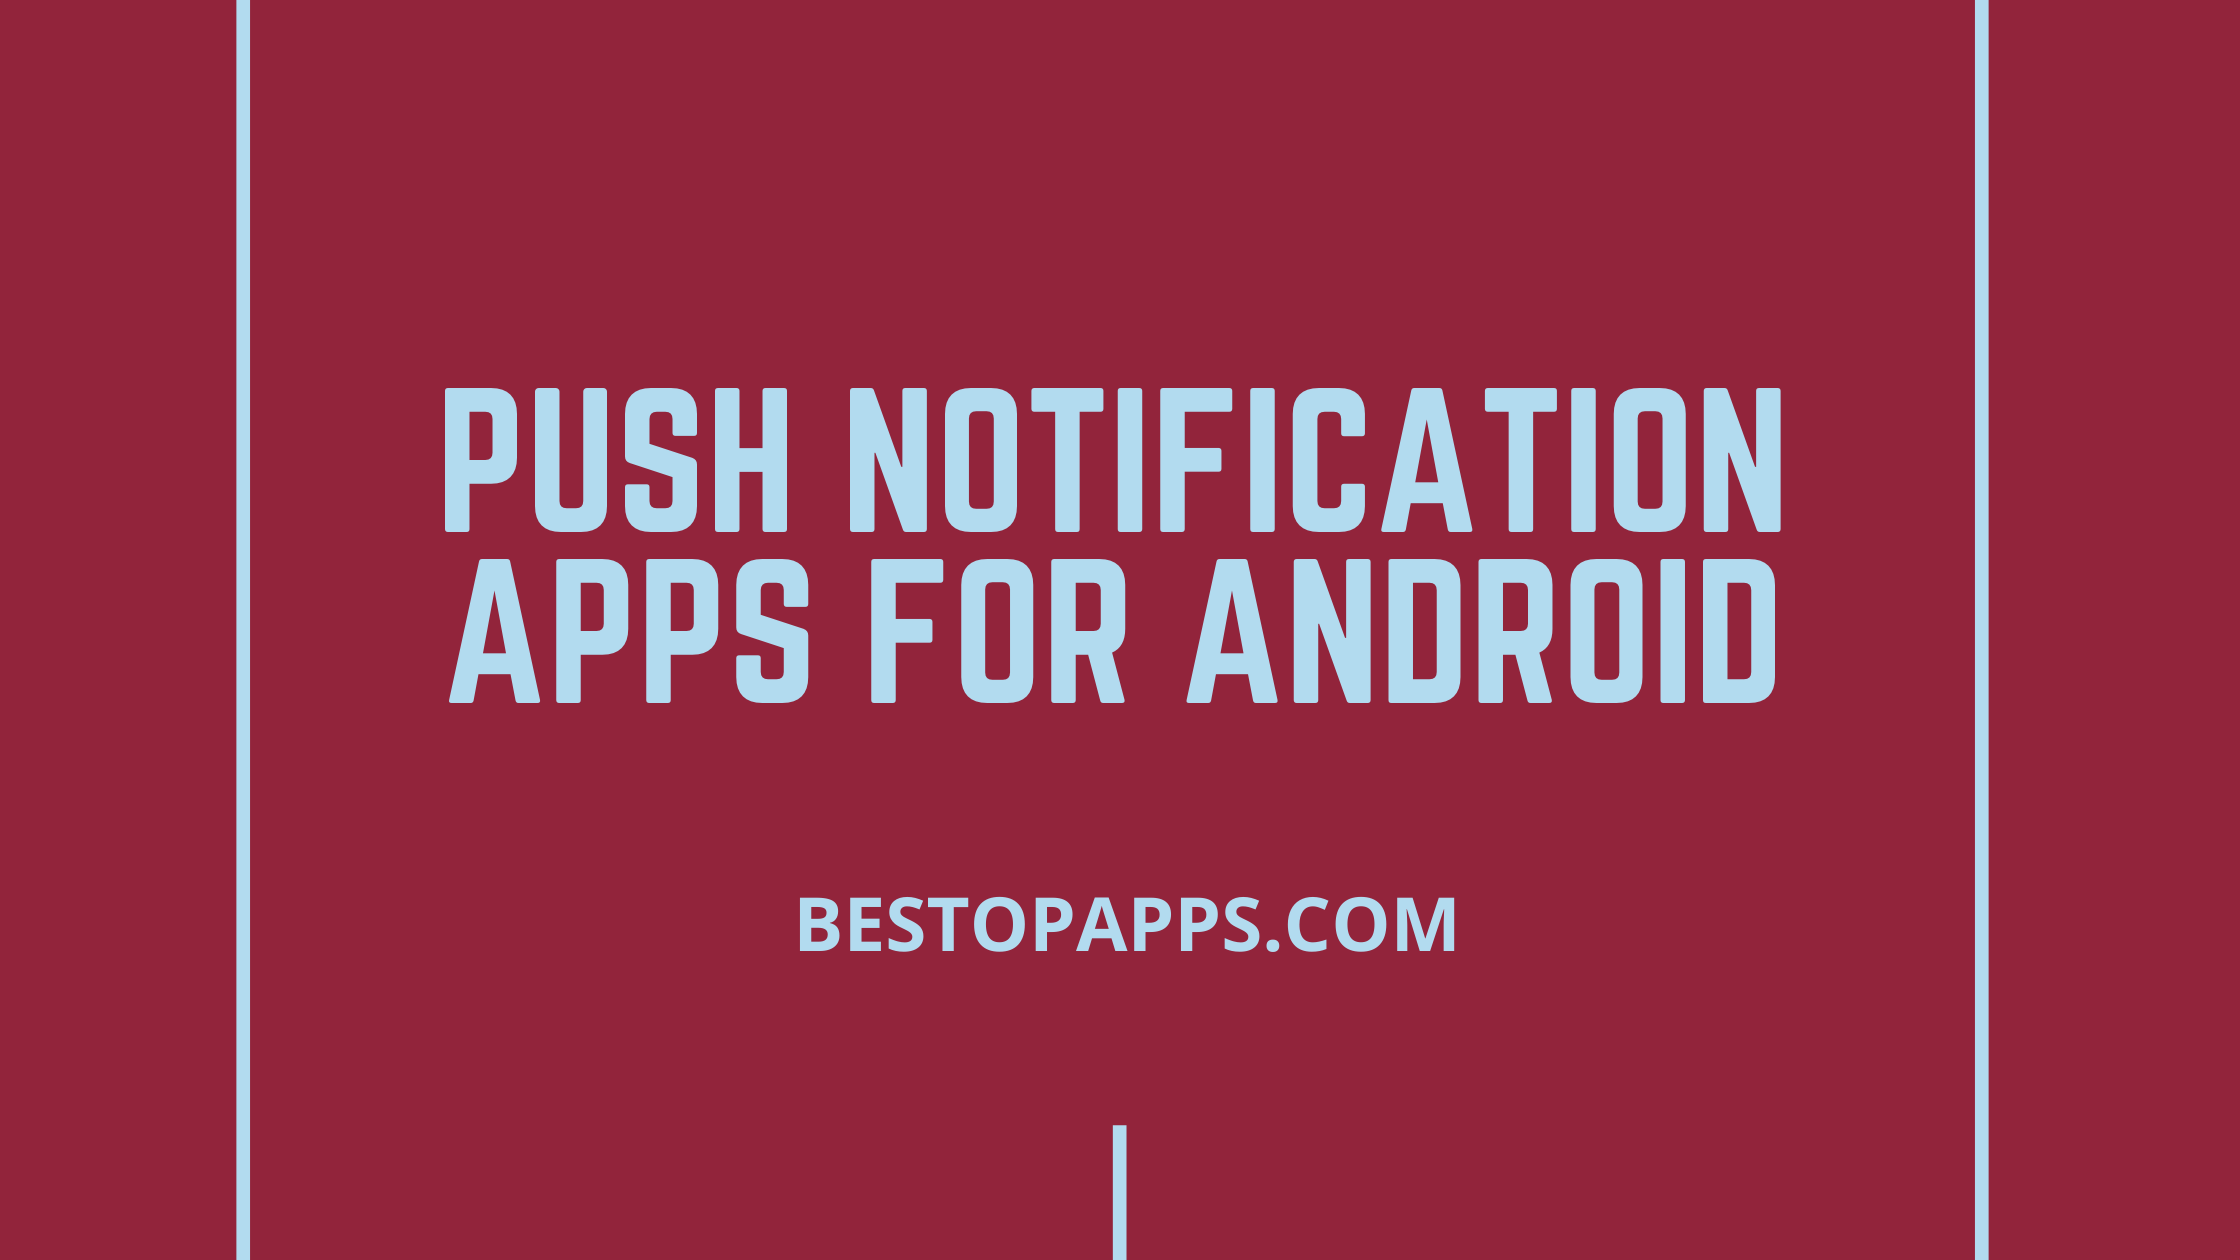 Push Notification Apps for Android